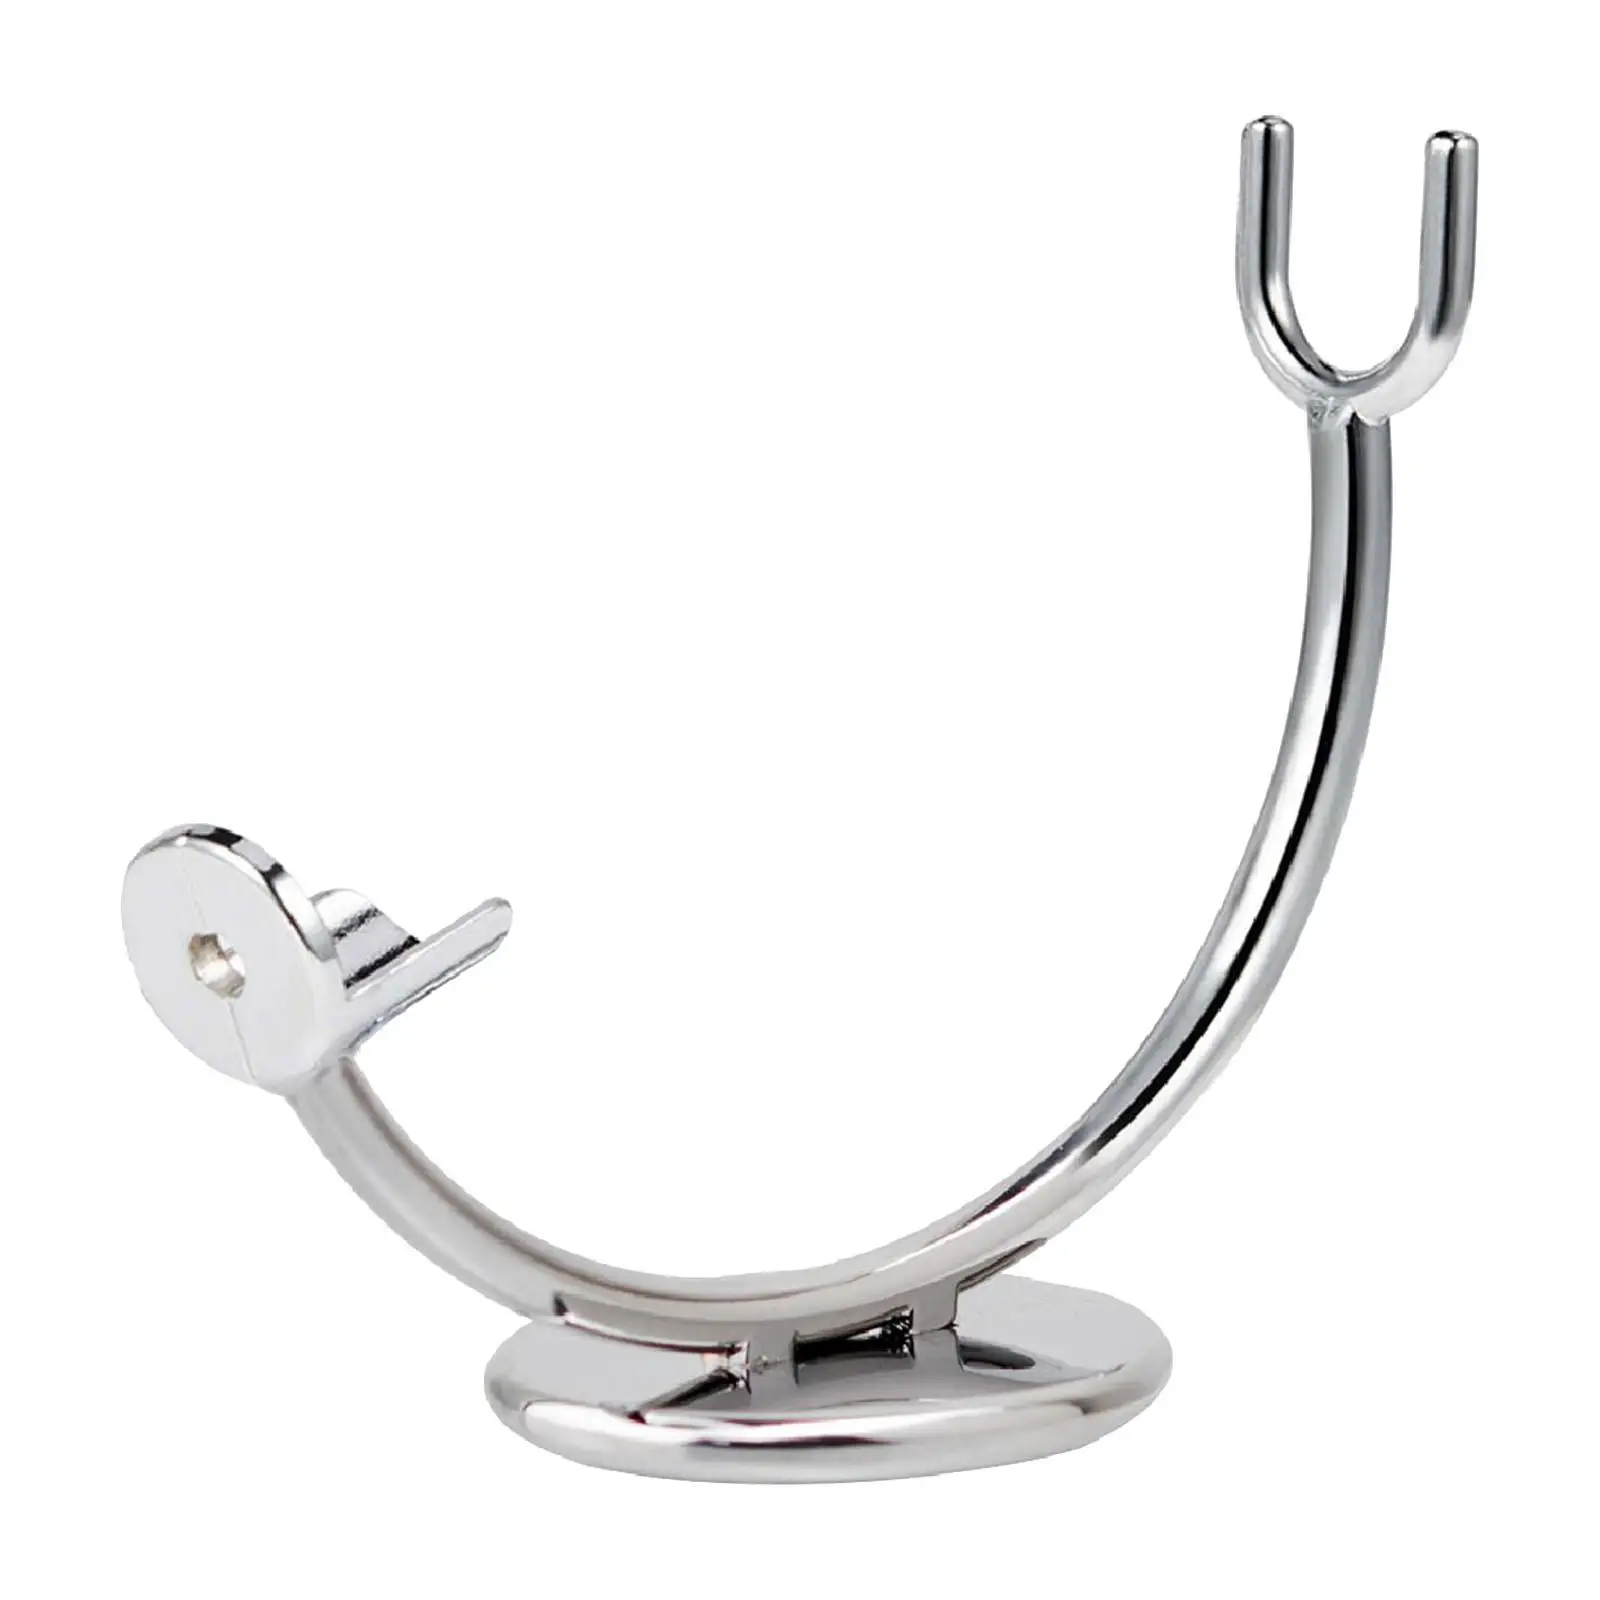 Straight Razor Stand Curved Stand Razor Holder Stable Bottom Height 8.7cm/3.4inch for Razors with Handle Length 100mm Accessory